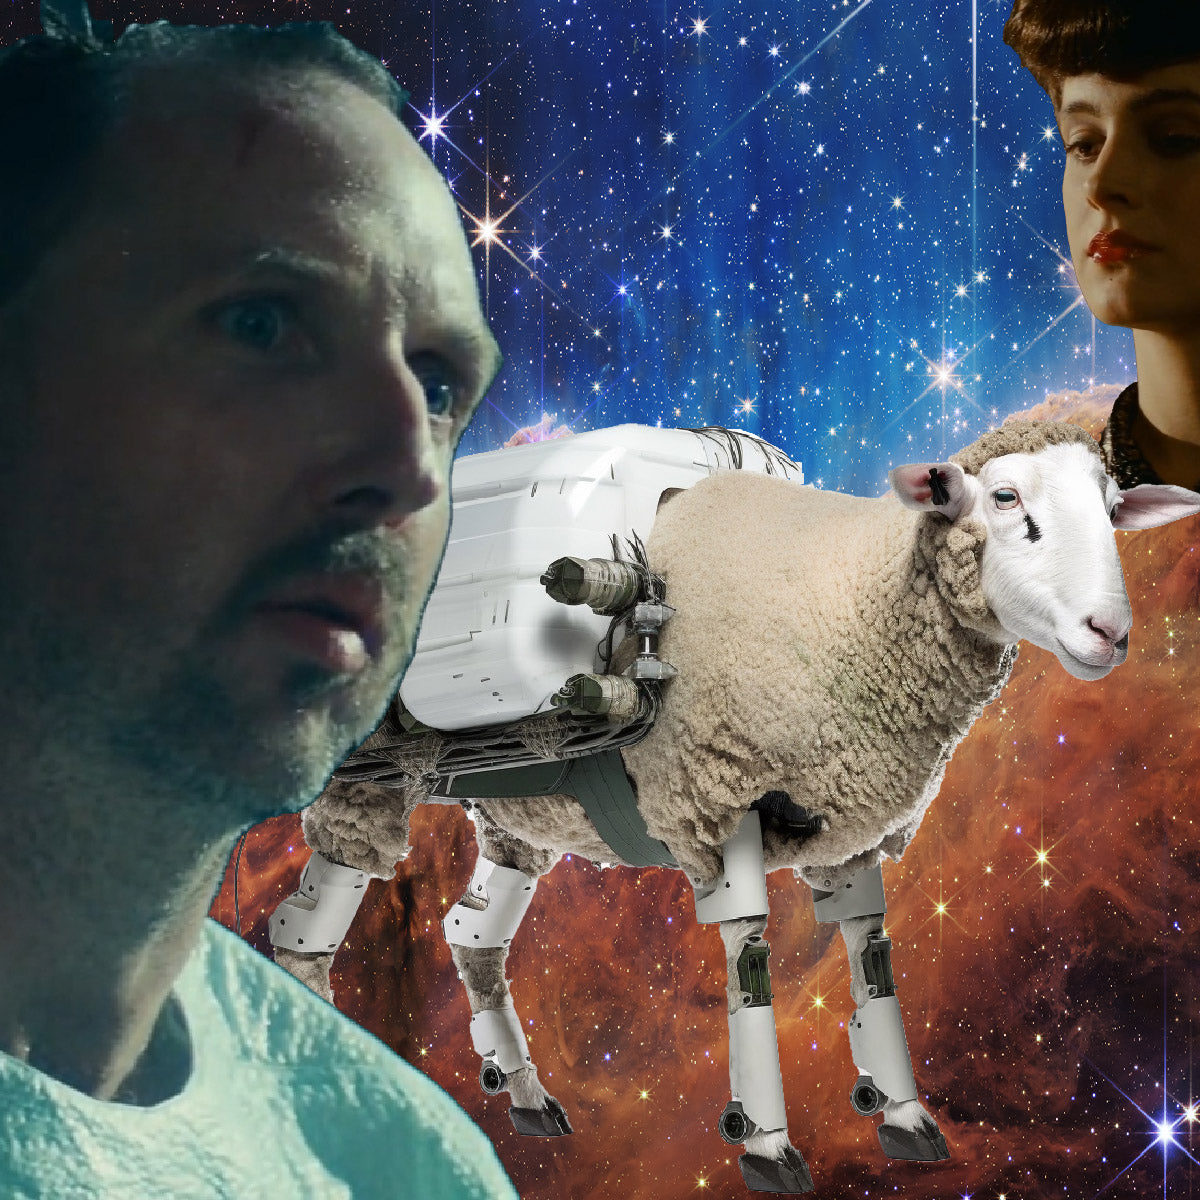 Androids Dream of Electric Sheep